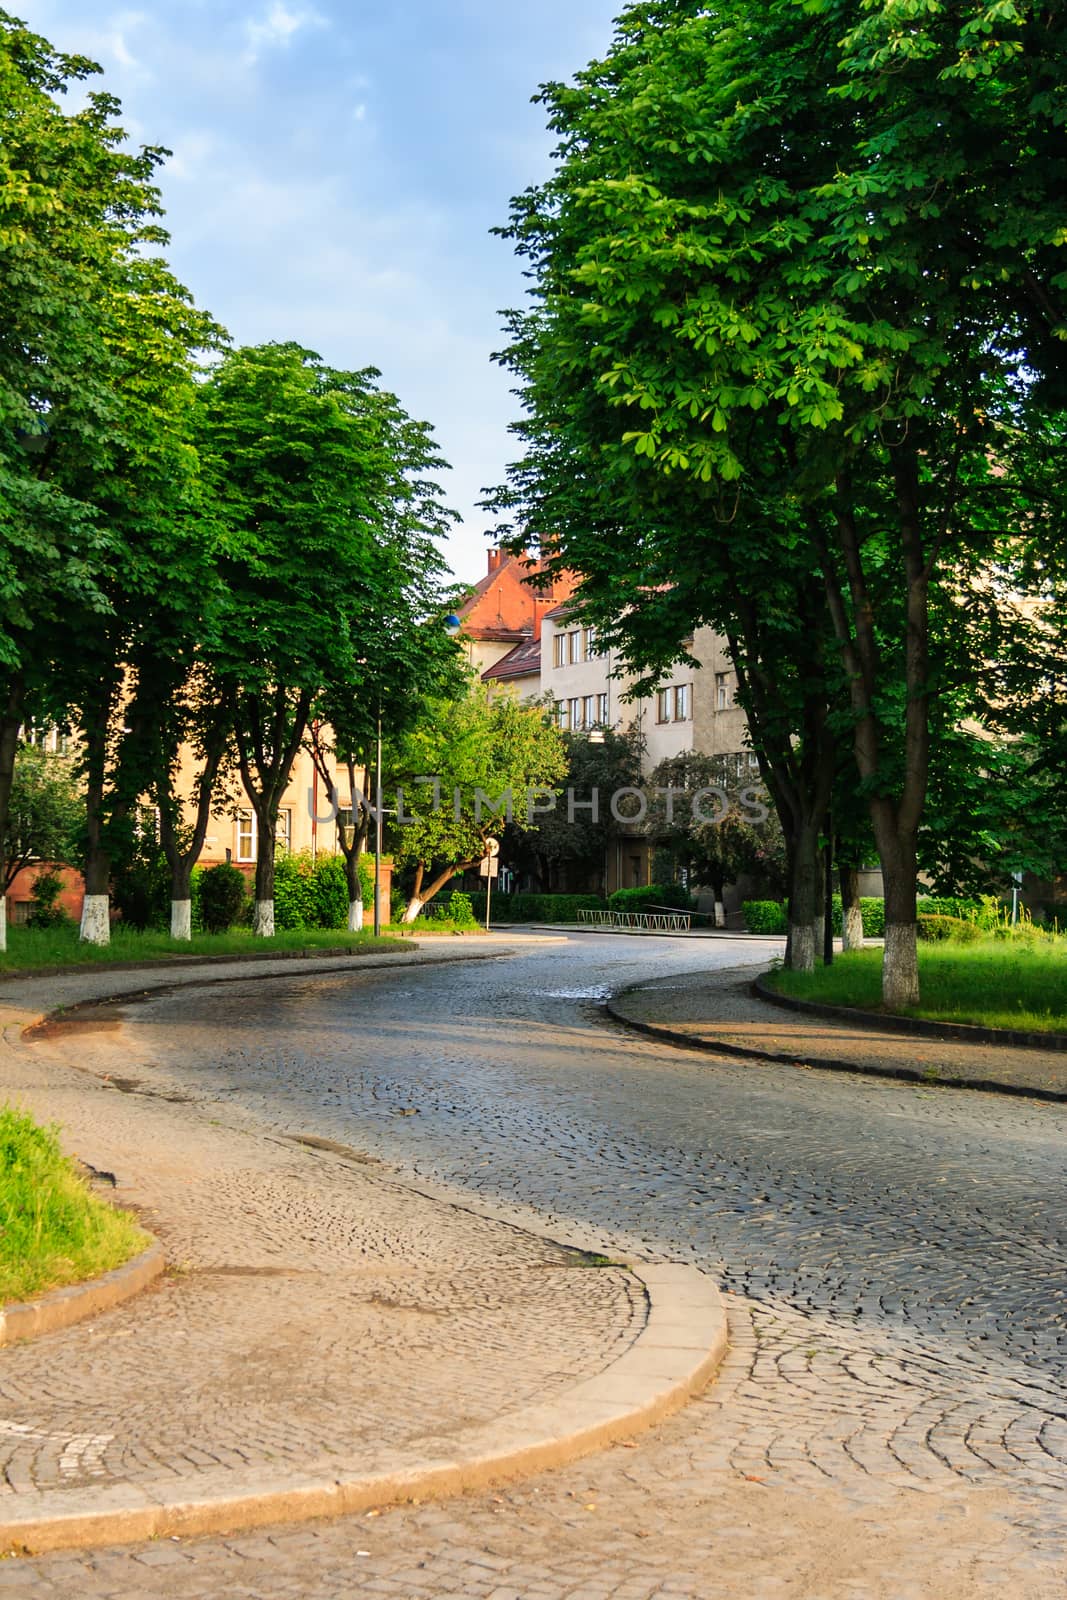 paving winds through the old town near the park in the early morning